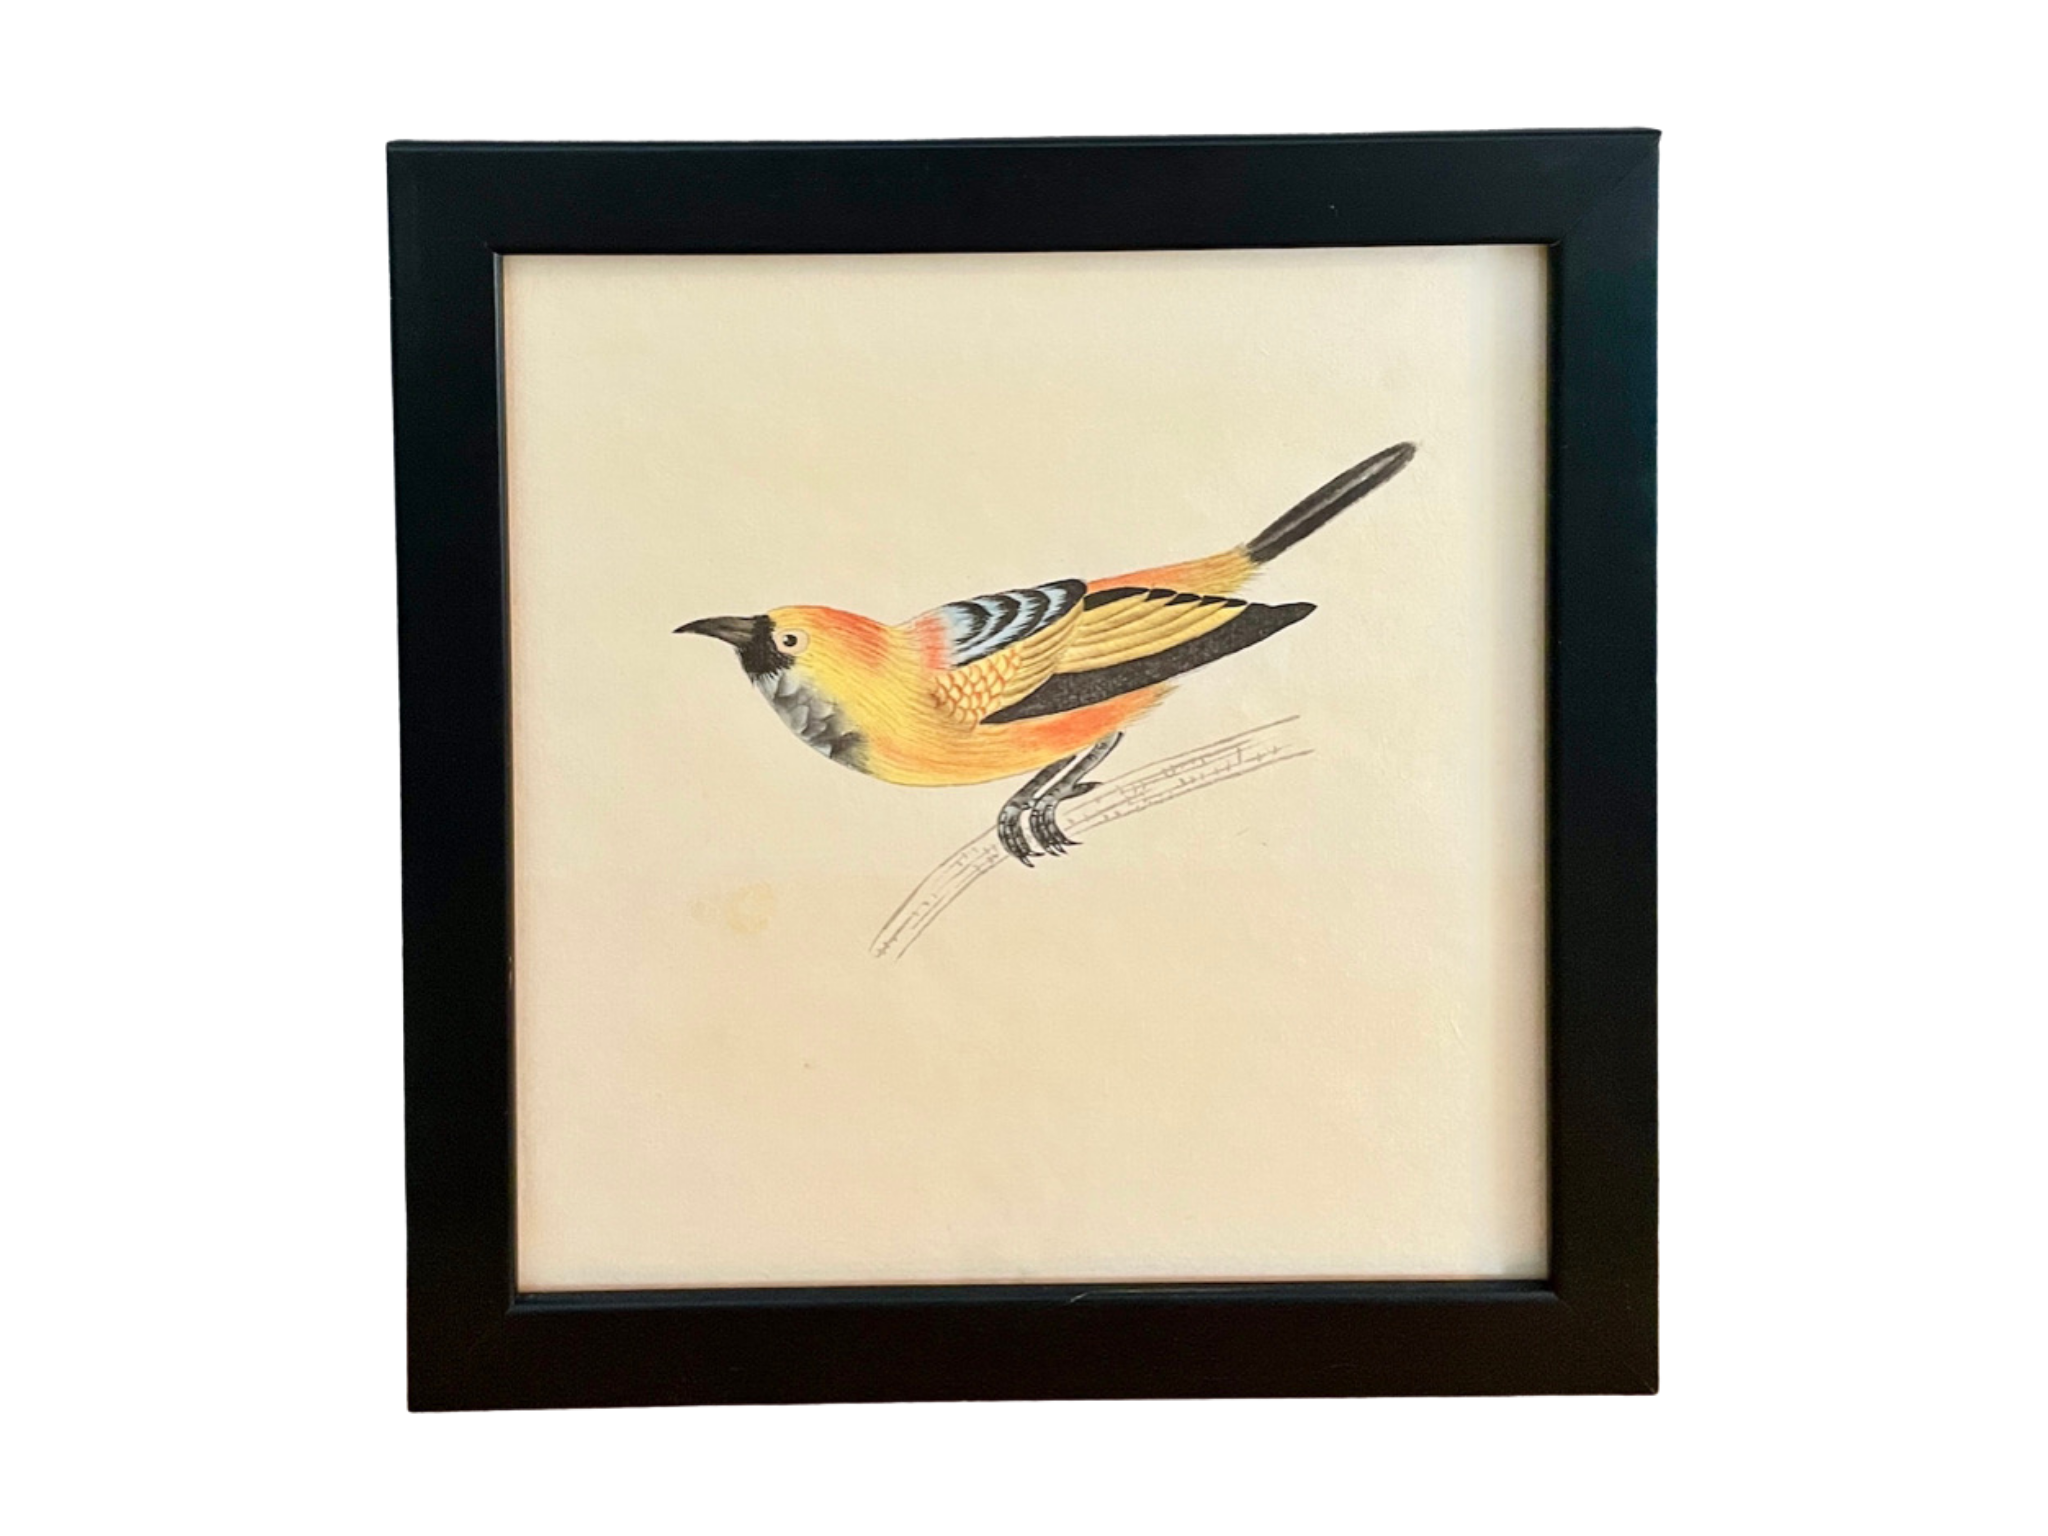 Vintage Goauche and Ink Drawing of Yellow Bird